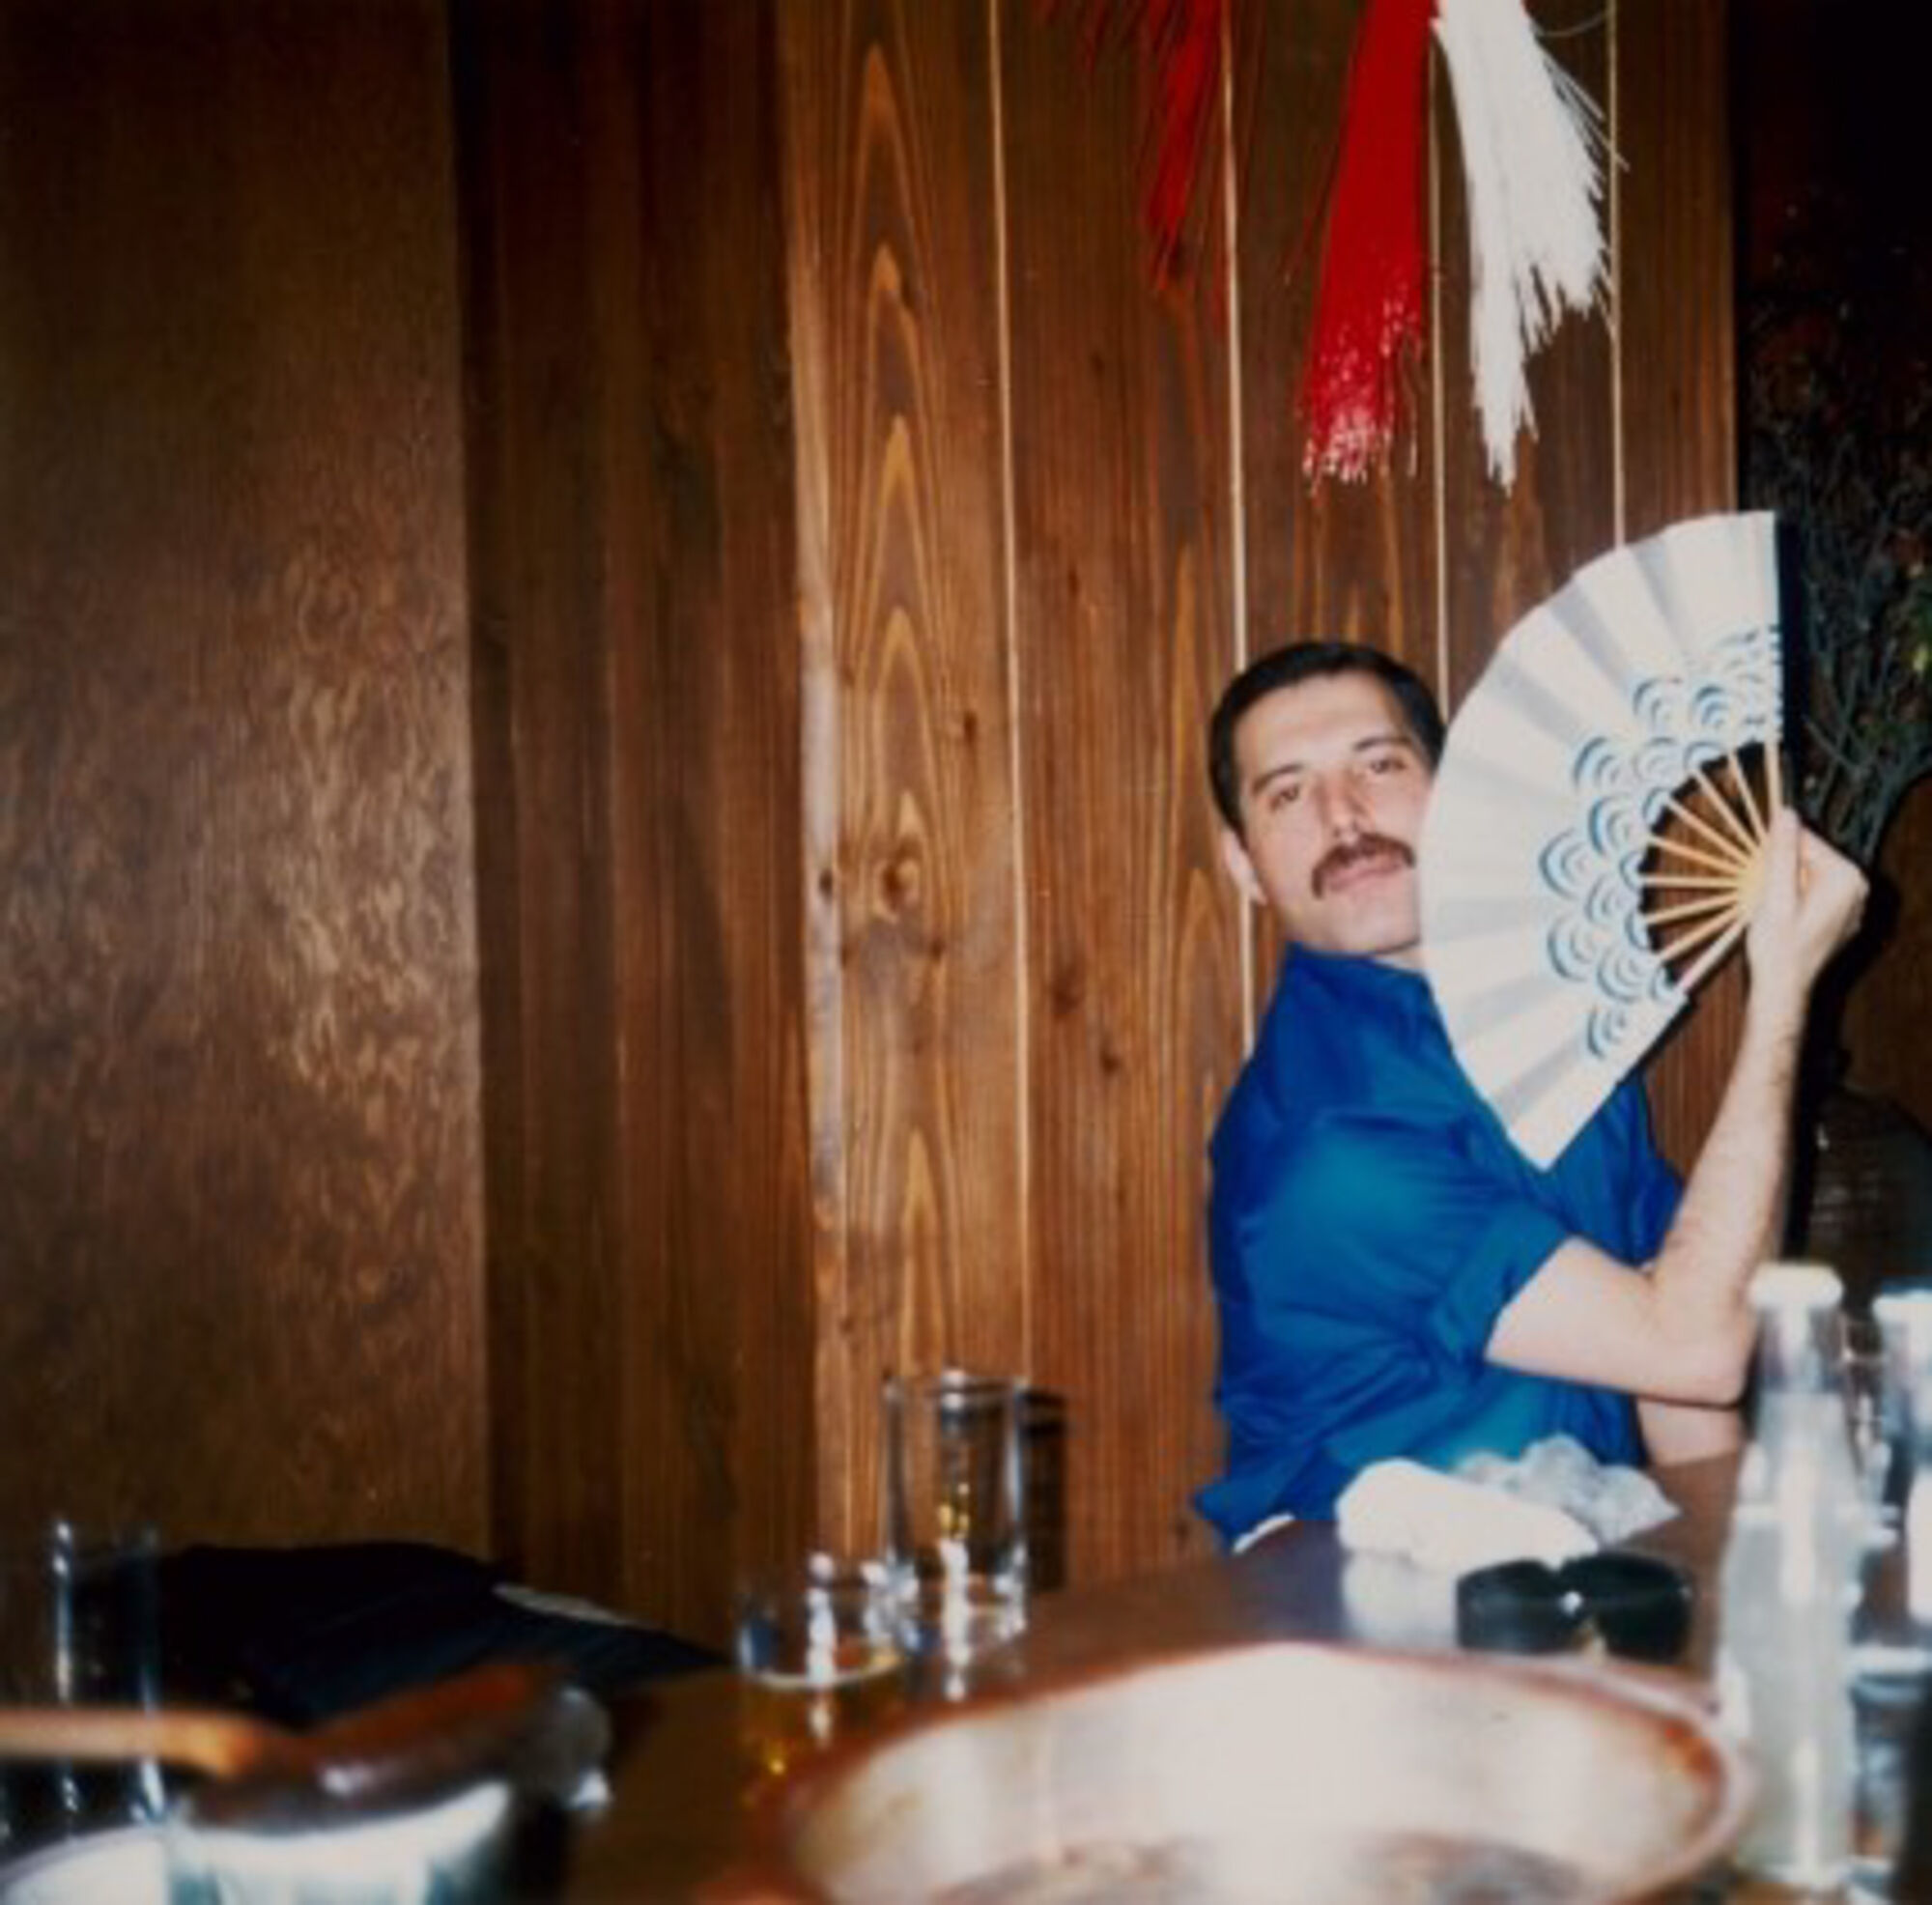 The Wick - A candid photograph of Freddie relaxing after a concert in a Japanese restaurant, courtesy of Sotheby's 